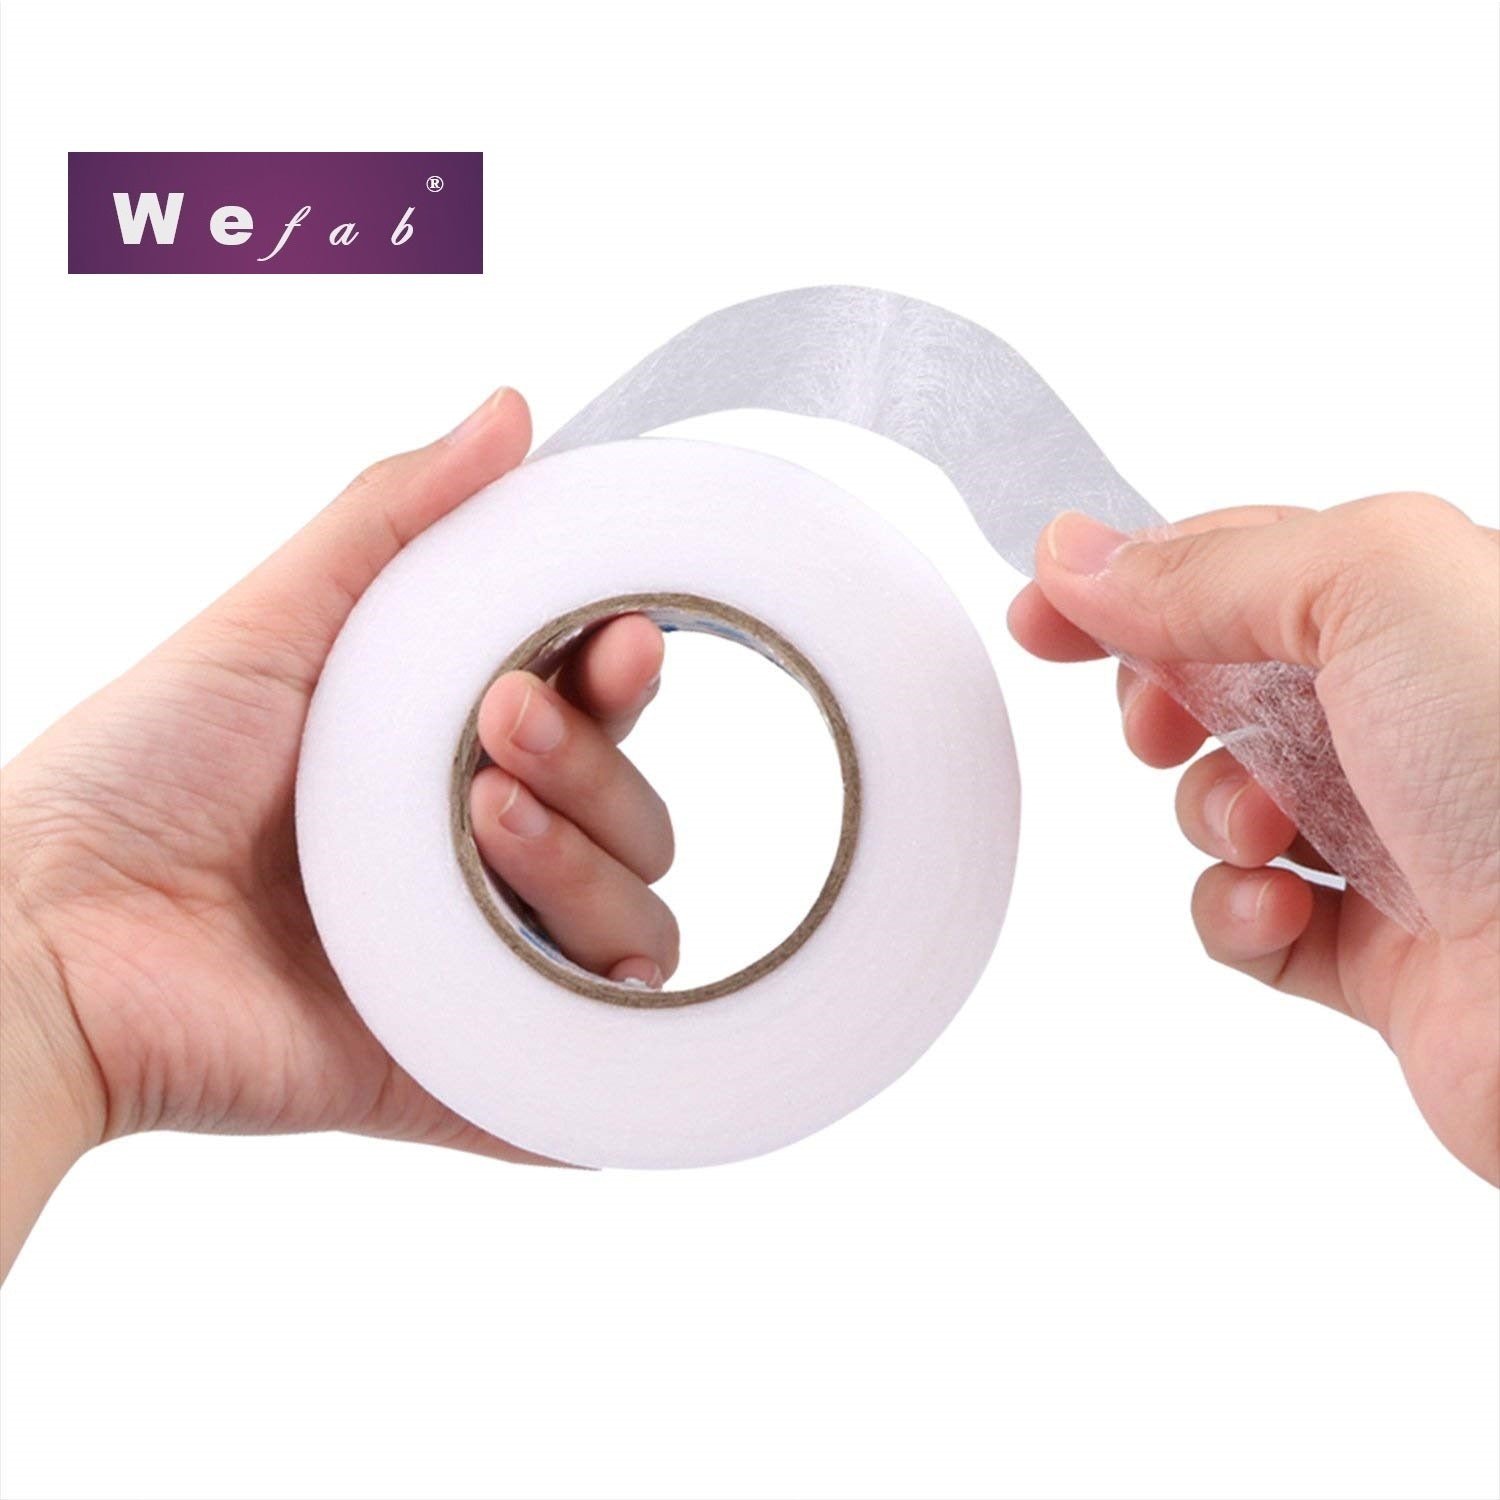 Tranqun 8 Rolls Iron on Hemming Tape 0.4, 0.8, 1.2, 1.6 Inch No Sew Hem  Tape Fabric Fusible Hemming Strip for Pants Jeans Curtains Dress Sewing  Fabric